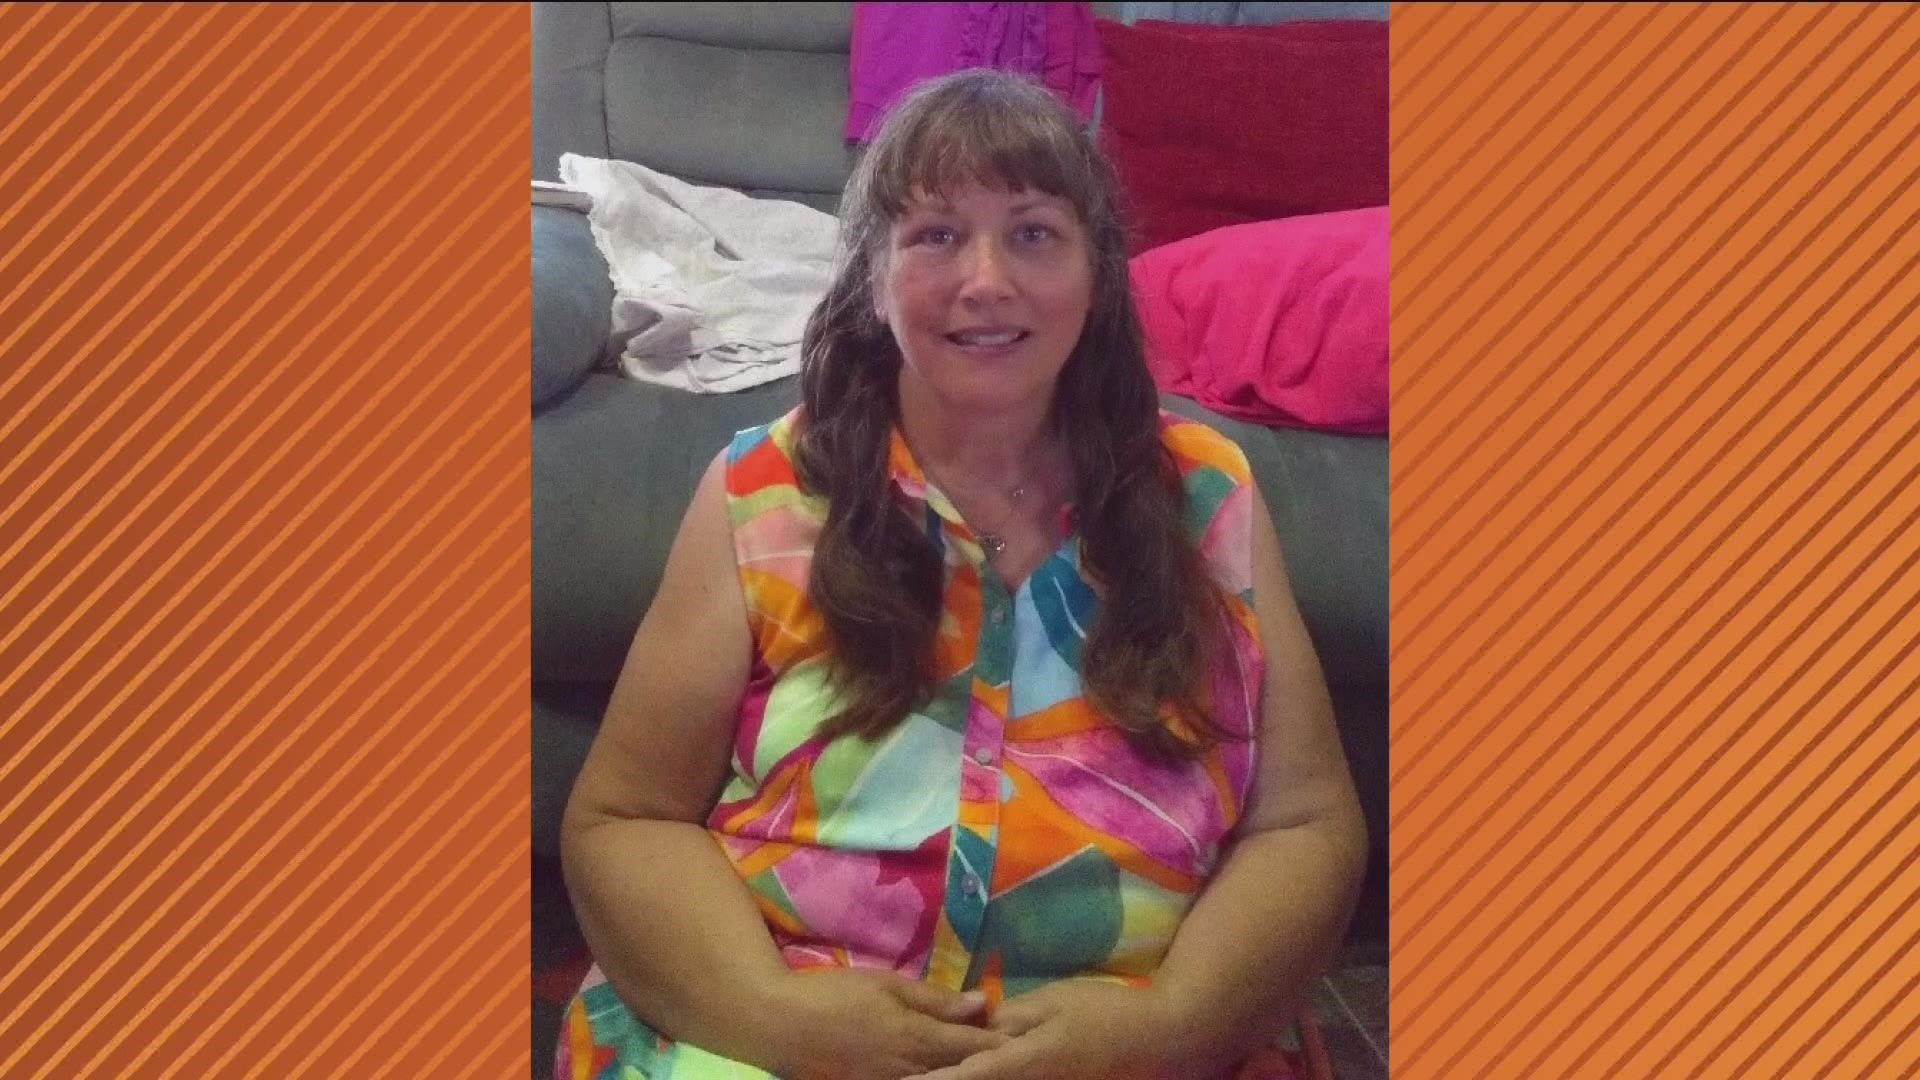 Kathy Jo Jones's family reported her vehicle had been found out of gas and believes she was unable to find relief from the extreme heat.